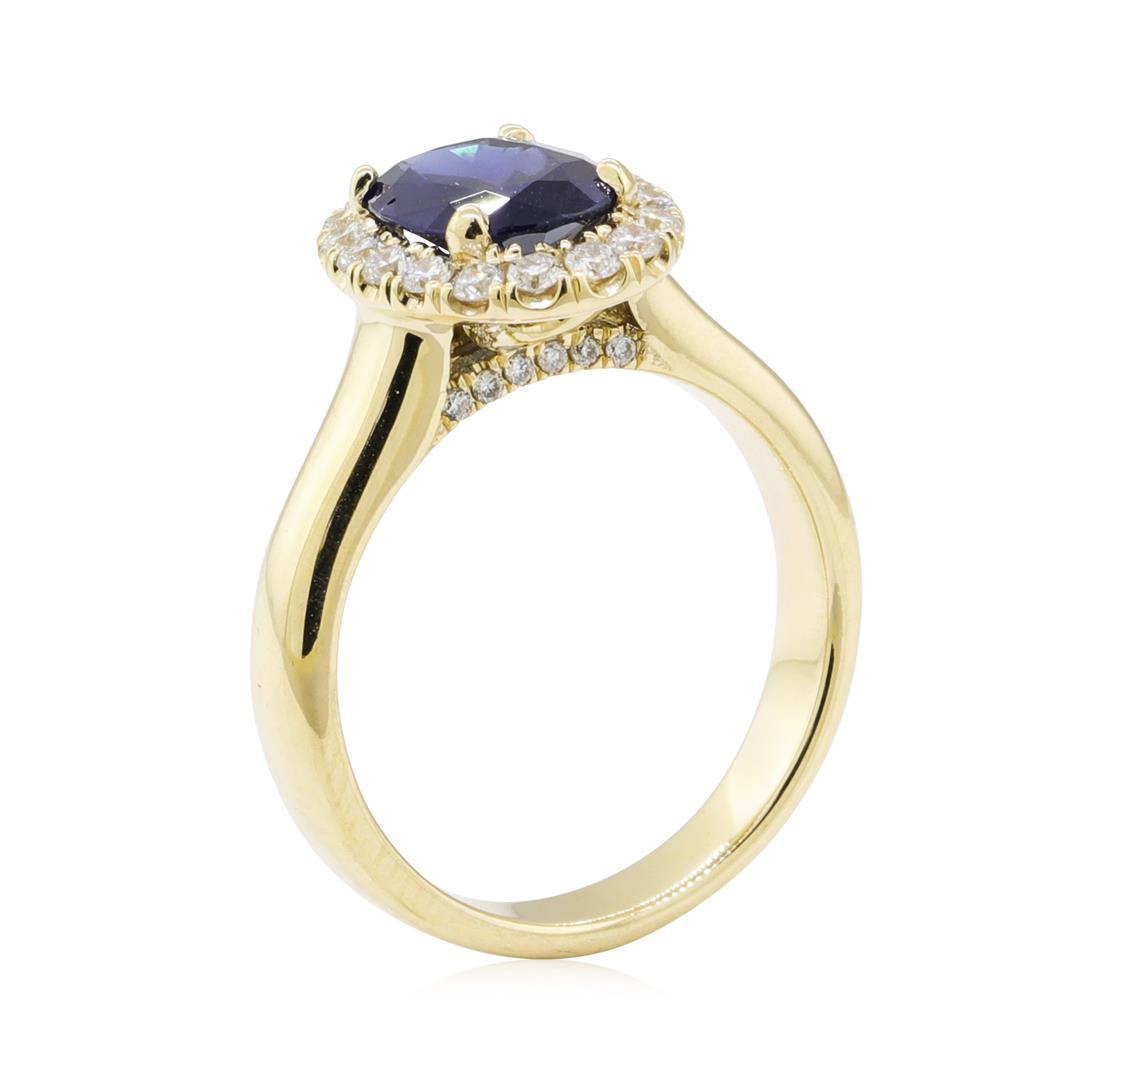 1.48 ctw Sapphire and Diamond Ring - 14KT Yellow Gold